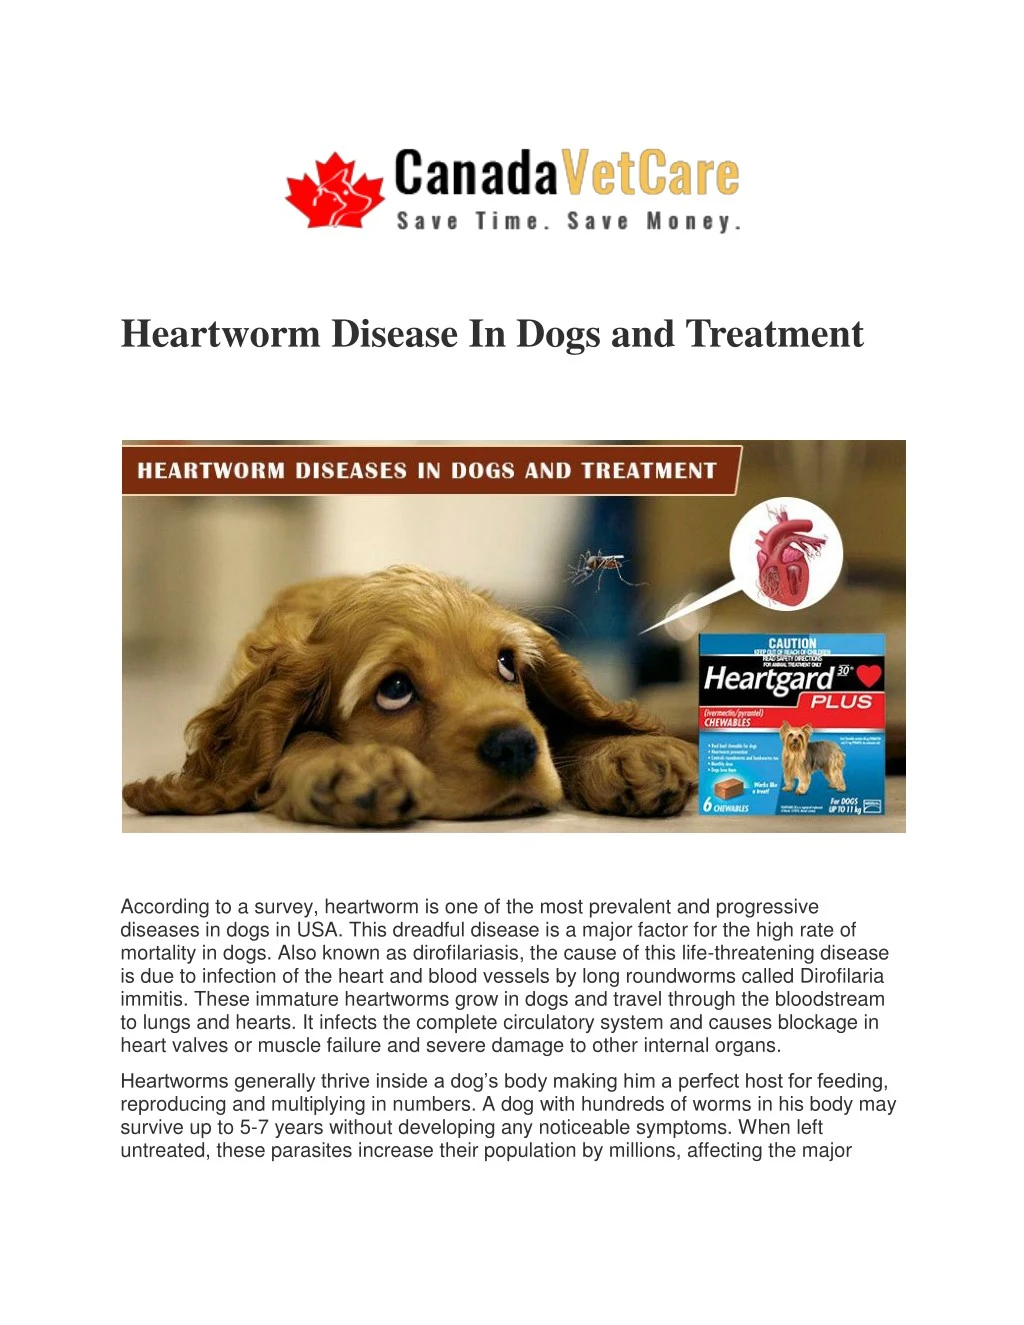 heartworm disease in dogs and treatment